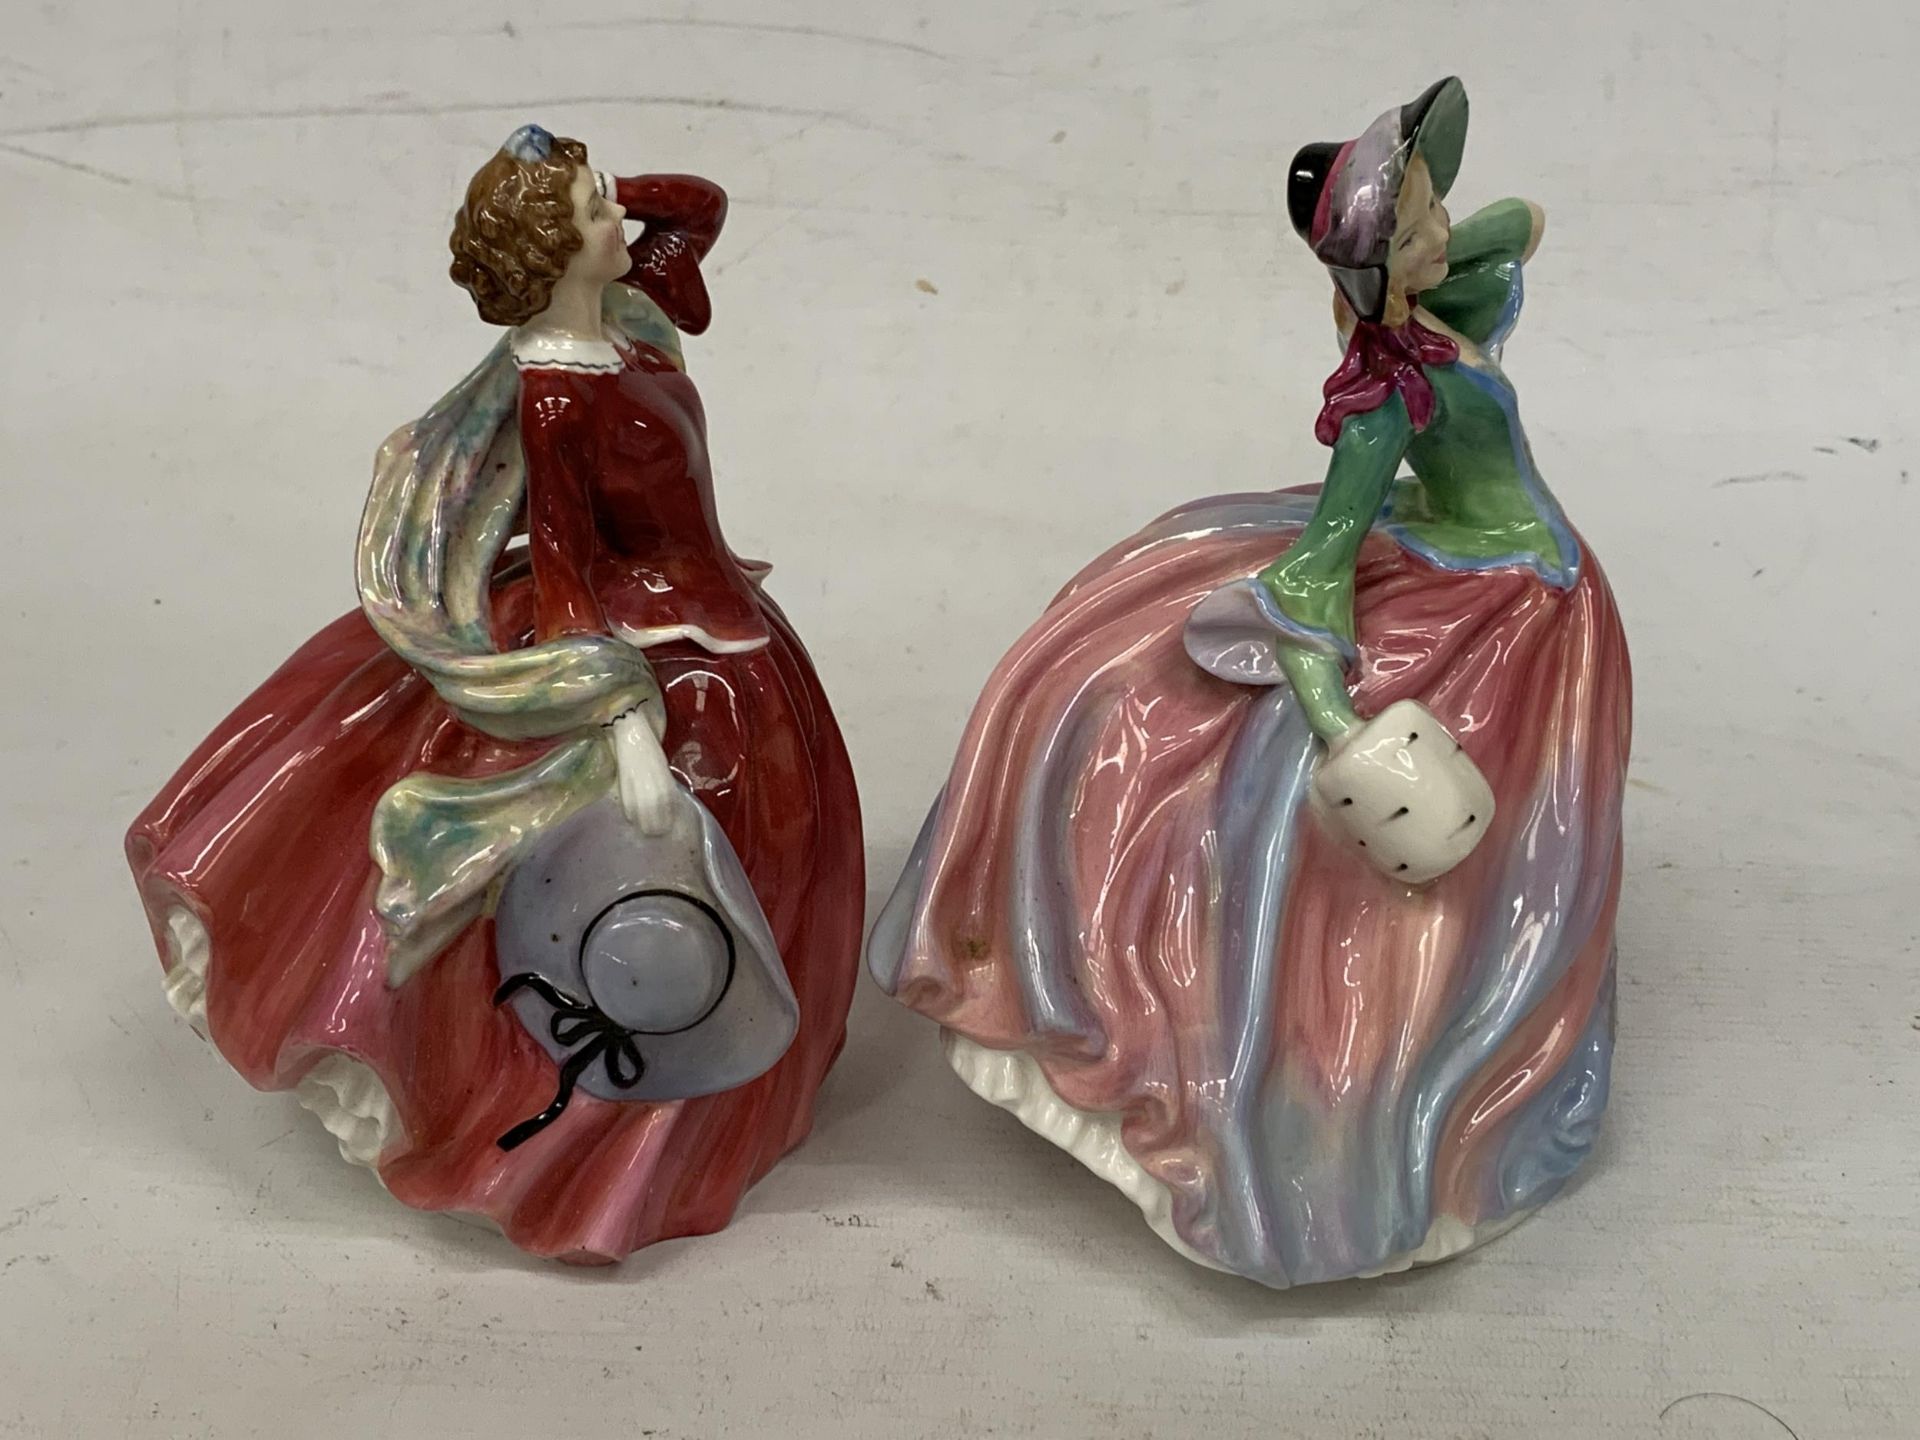 TWO ROYAL DOULTON FIGURINES "AUTUMN BREEZES" HN 1911 AND "BLITHE MORNING" HB 2045 - Image 2 of 5